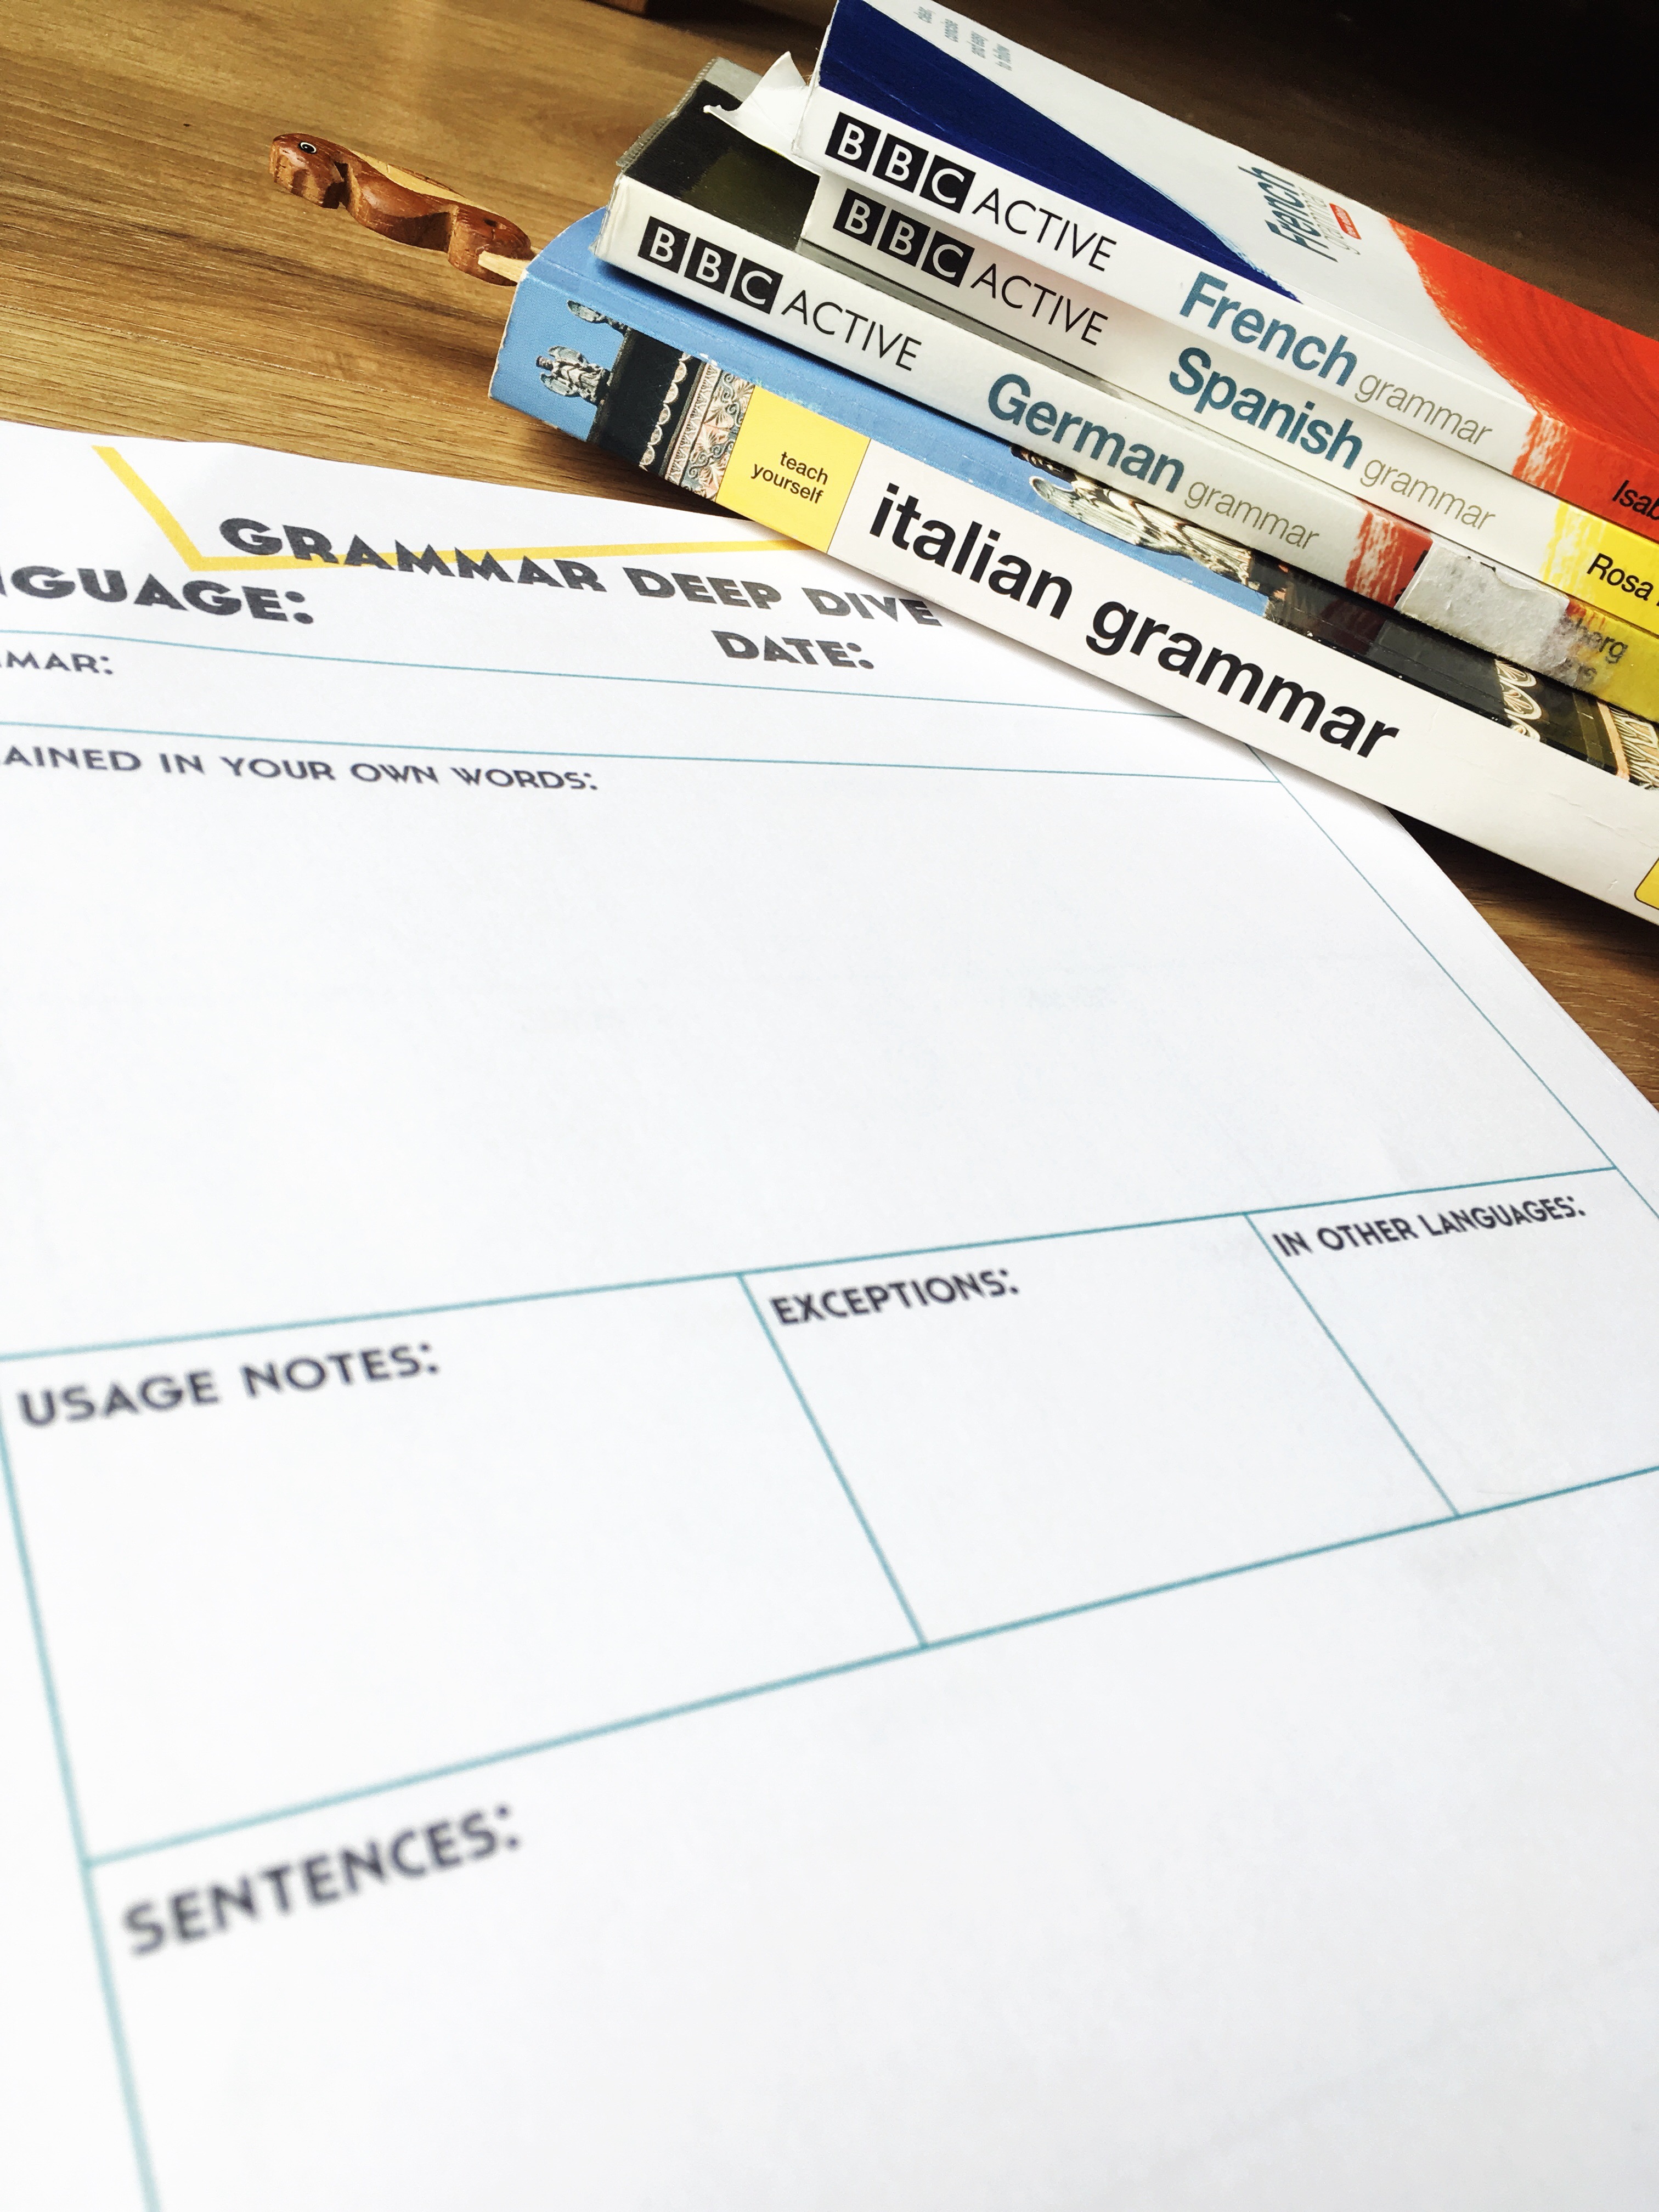 Sometimes language learning gets stressful, overcomplicated, and overwhelming. But the good news is that there's plenty of ways to track your language learning + get organised. Click through to learn more + get your free monthly mini planner too. ➔